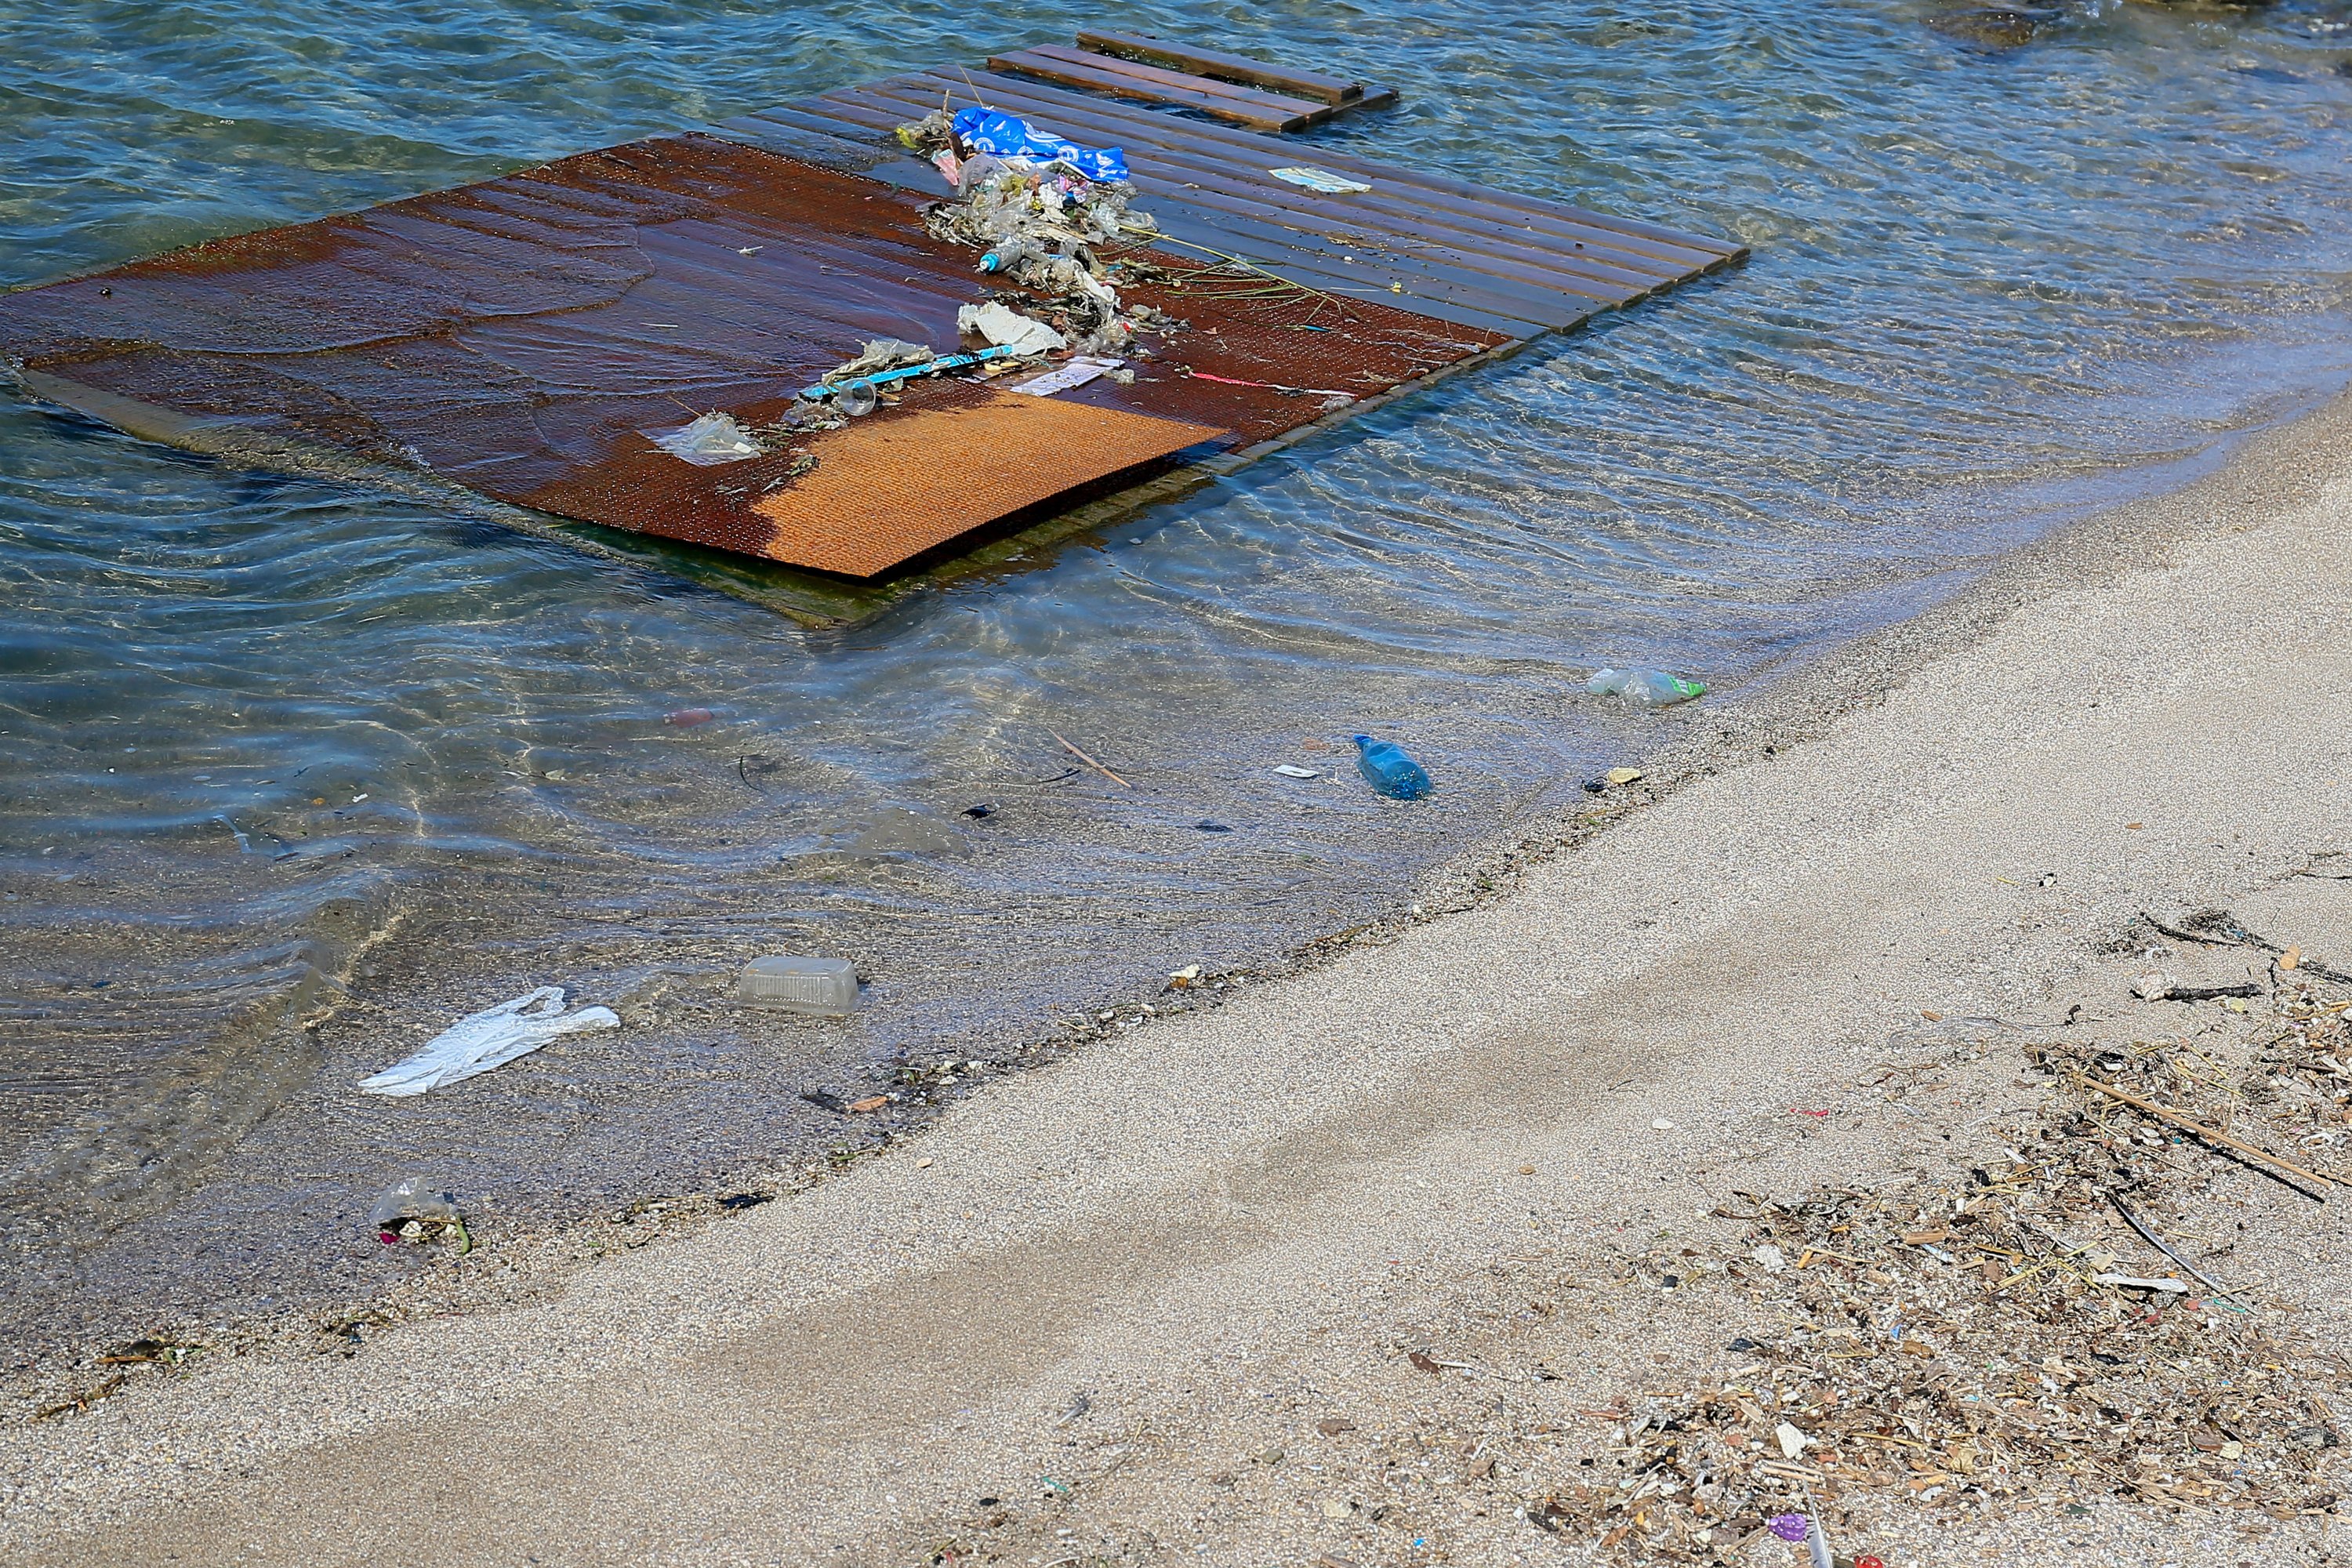 Plastic, wood and paper waste floating in the water along a beach, Sete, France, July 24, 2020. (via REUTERS)